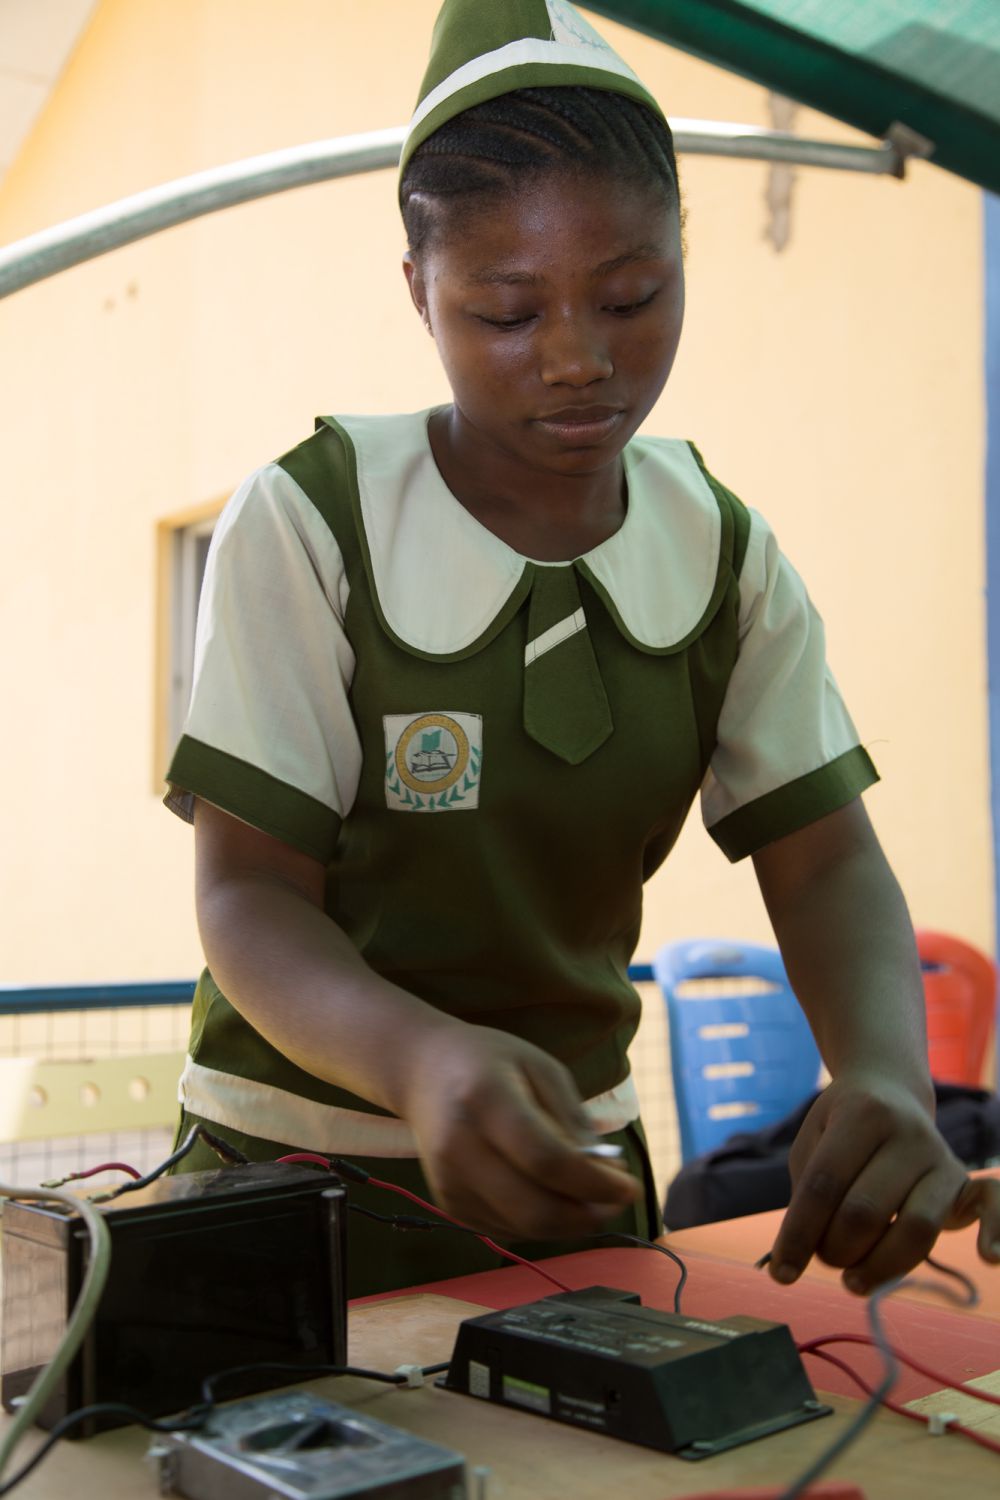 A pupil wires a solar cell, an important element within the science project her class is carrying out on domestic solar power
